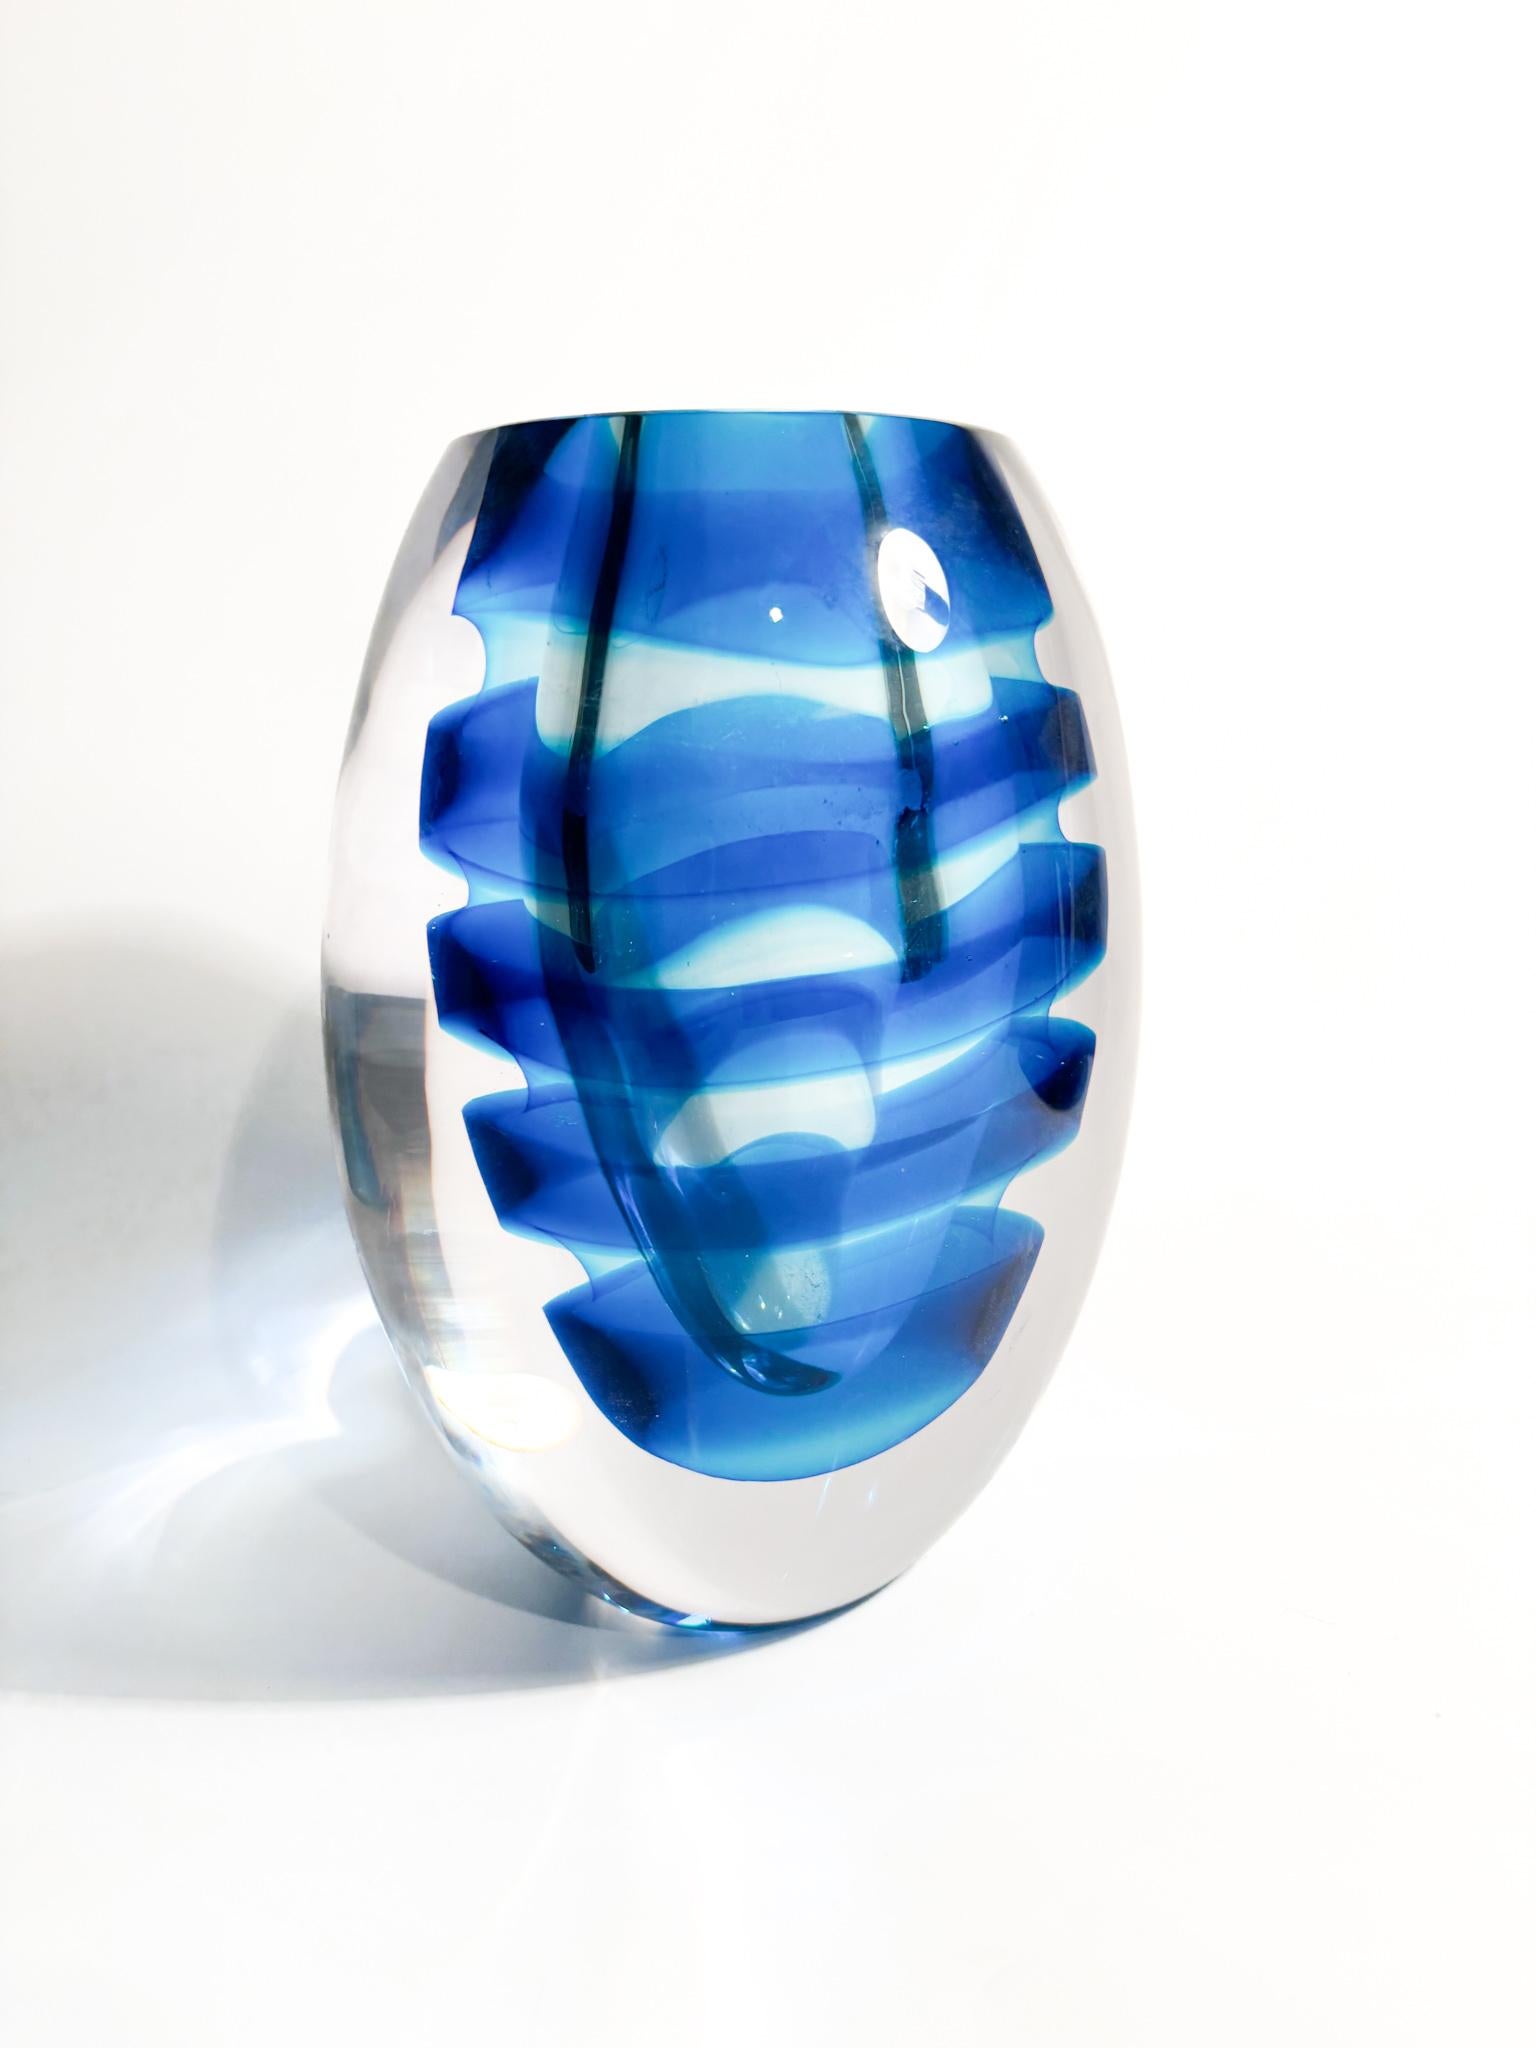 Contemporary Salviati Vase in Sommerso Blue Murano Glass from 2003 For Sale